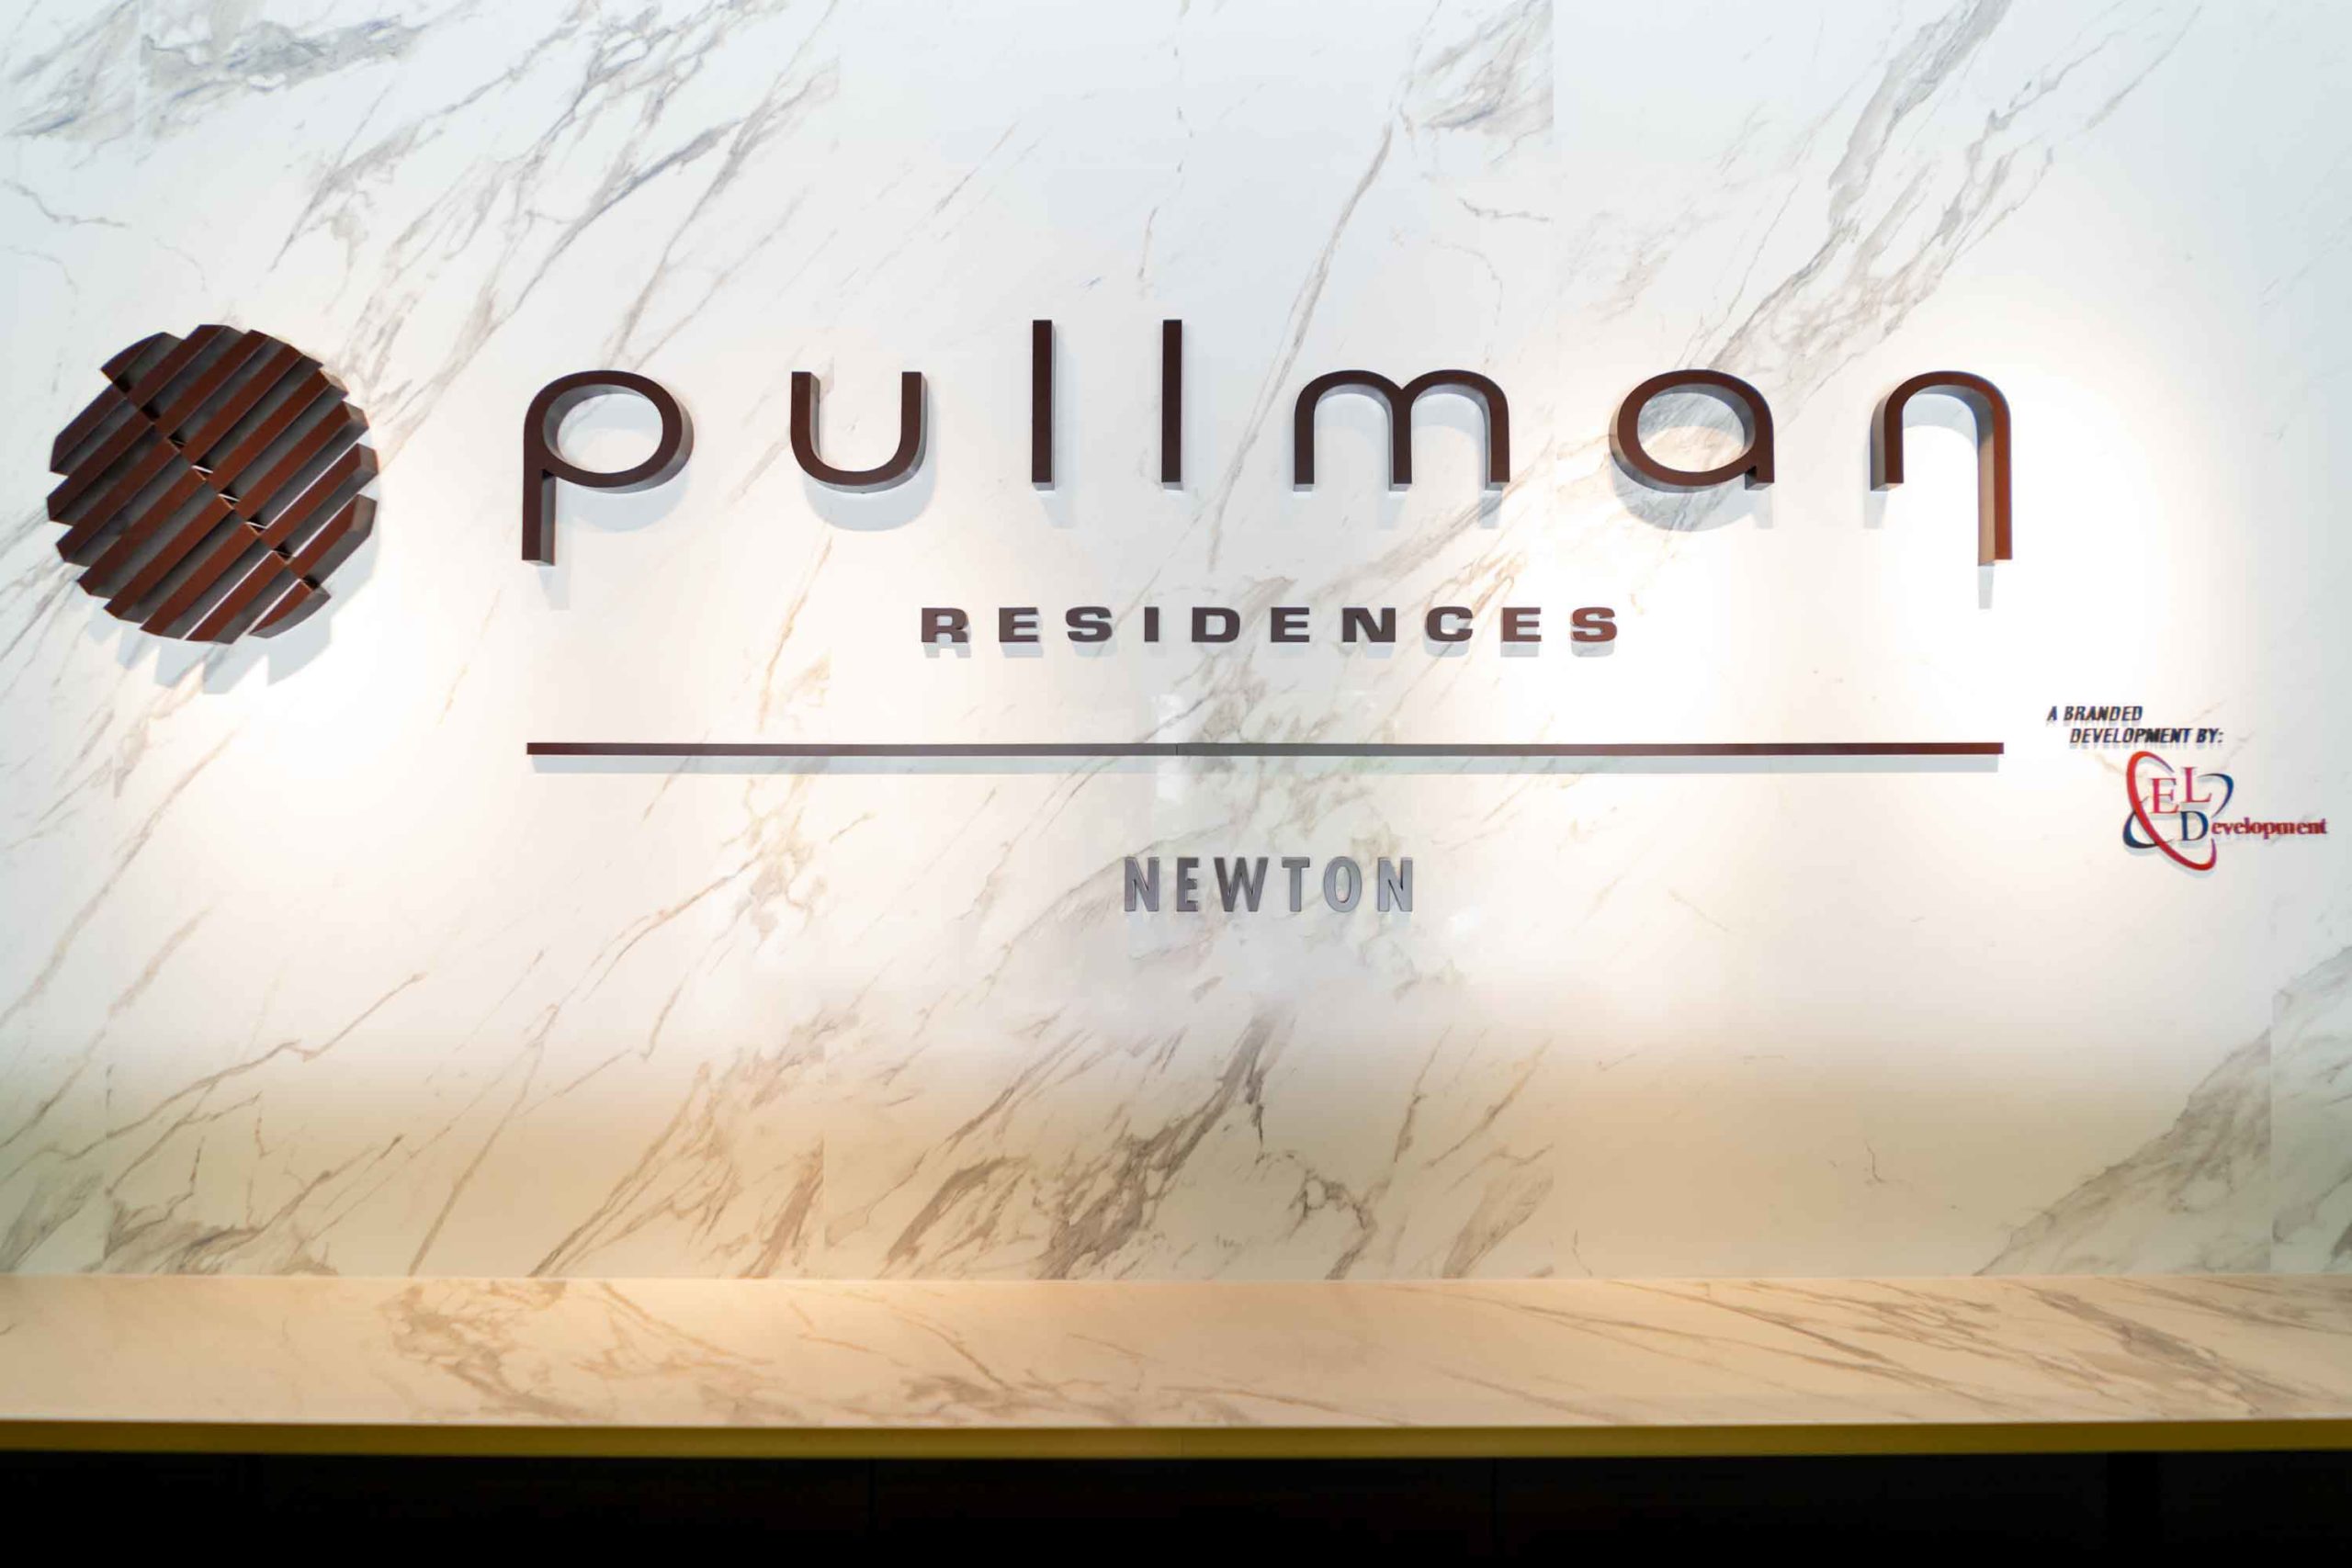 Pullman Residences 02 Scaled 